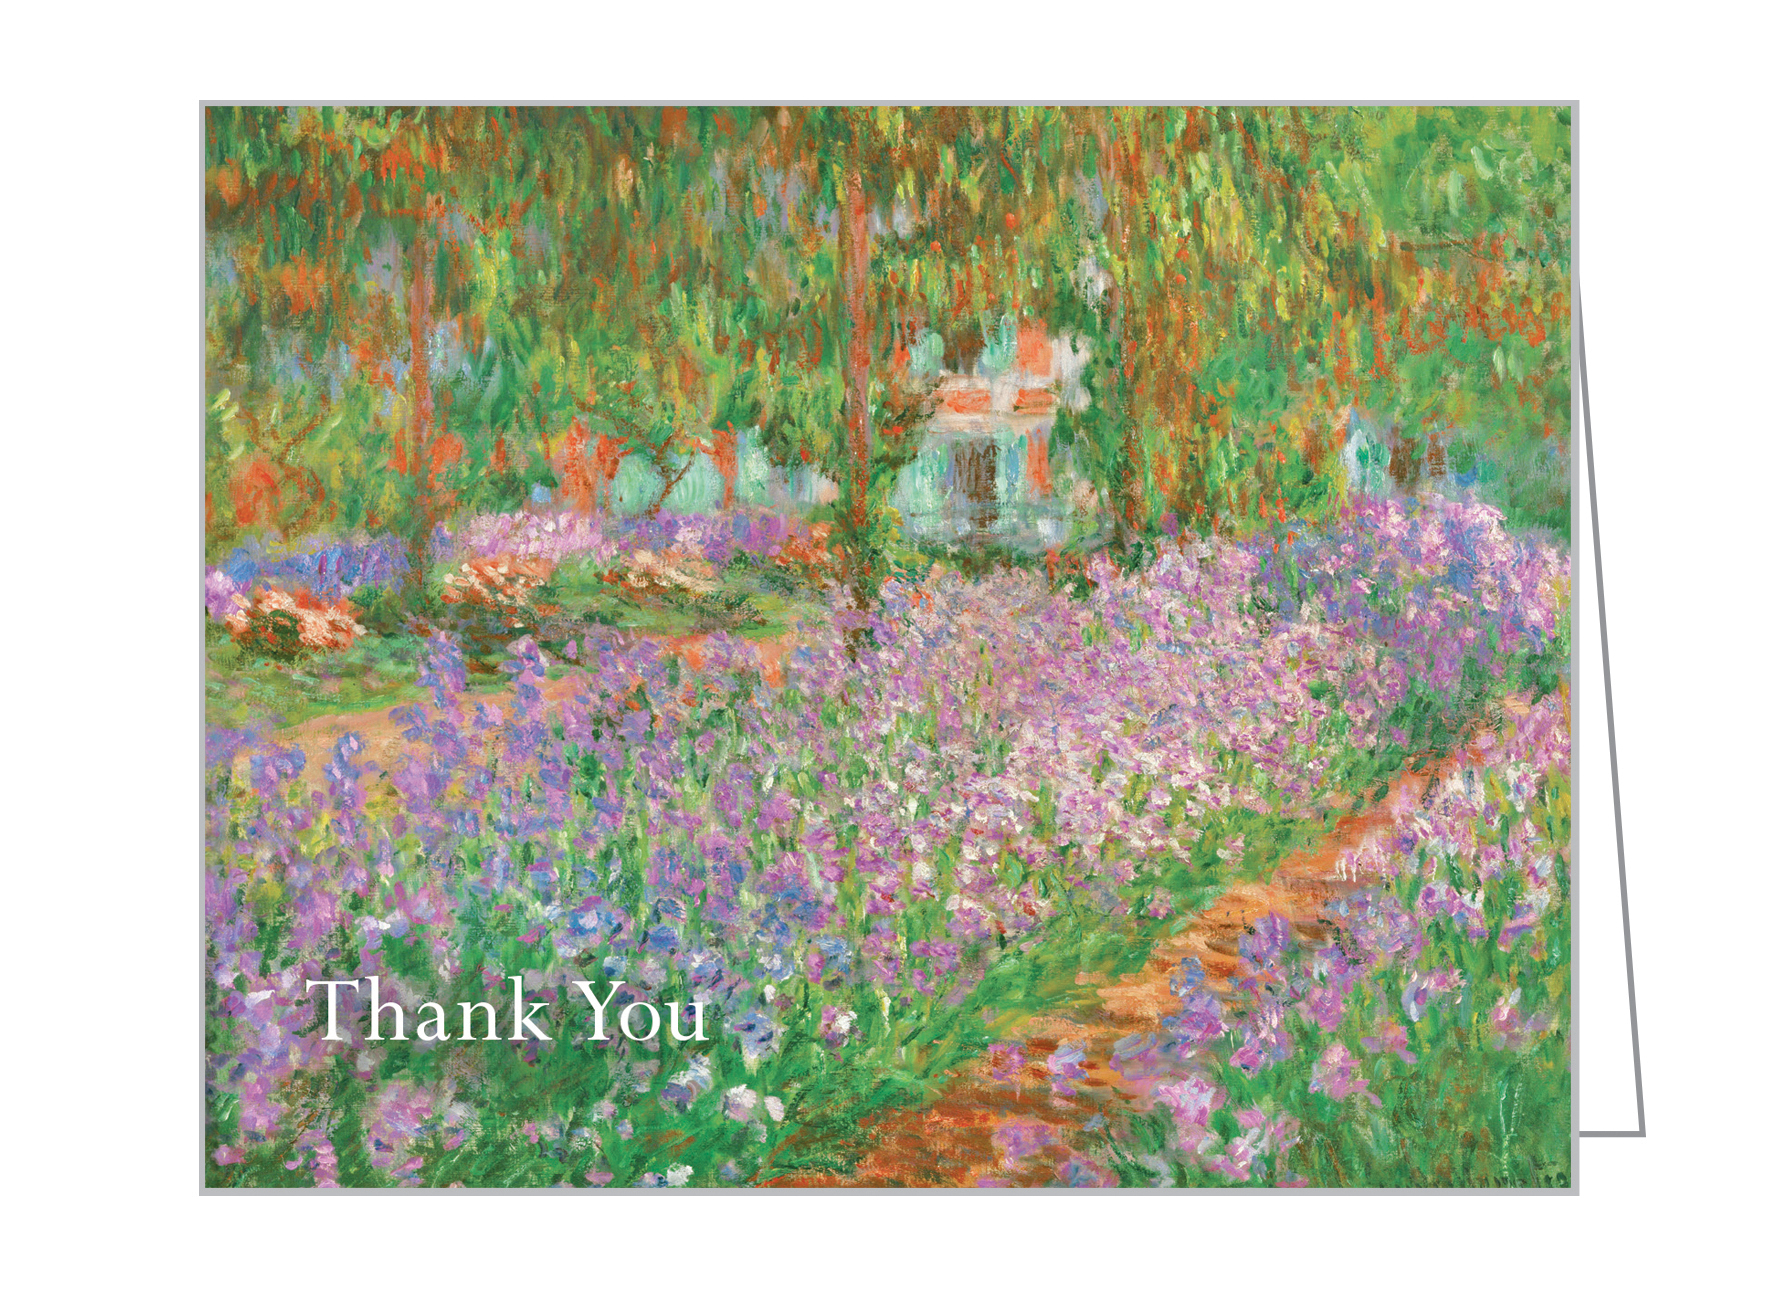 Claude Monet's painting 'The Artist's Garden at Giverny', on notecard box, by teNeues' Stationery.